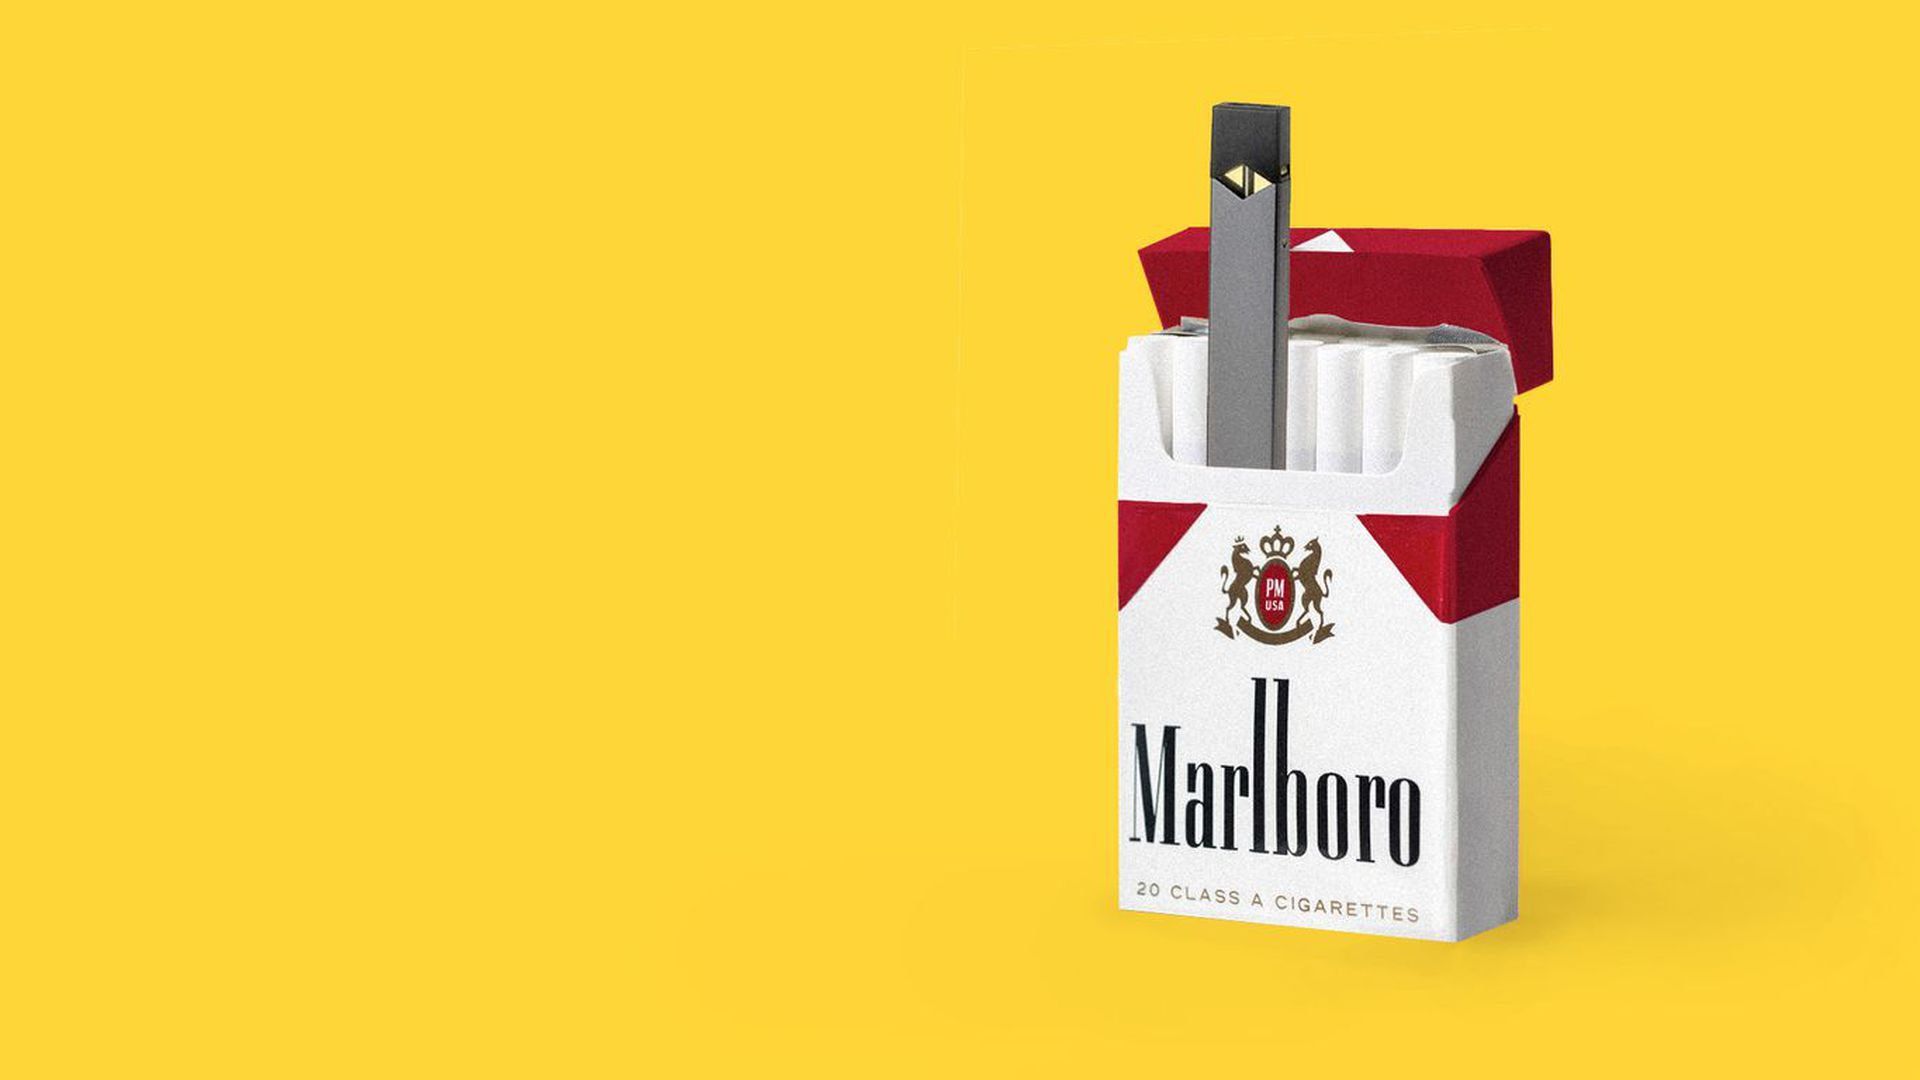 Illustration of a Juul sticking out of a carton of Marlboro cigarettes